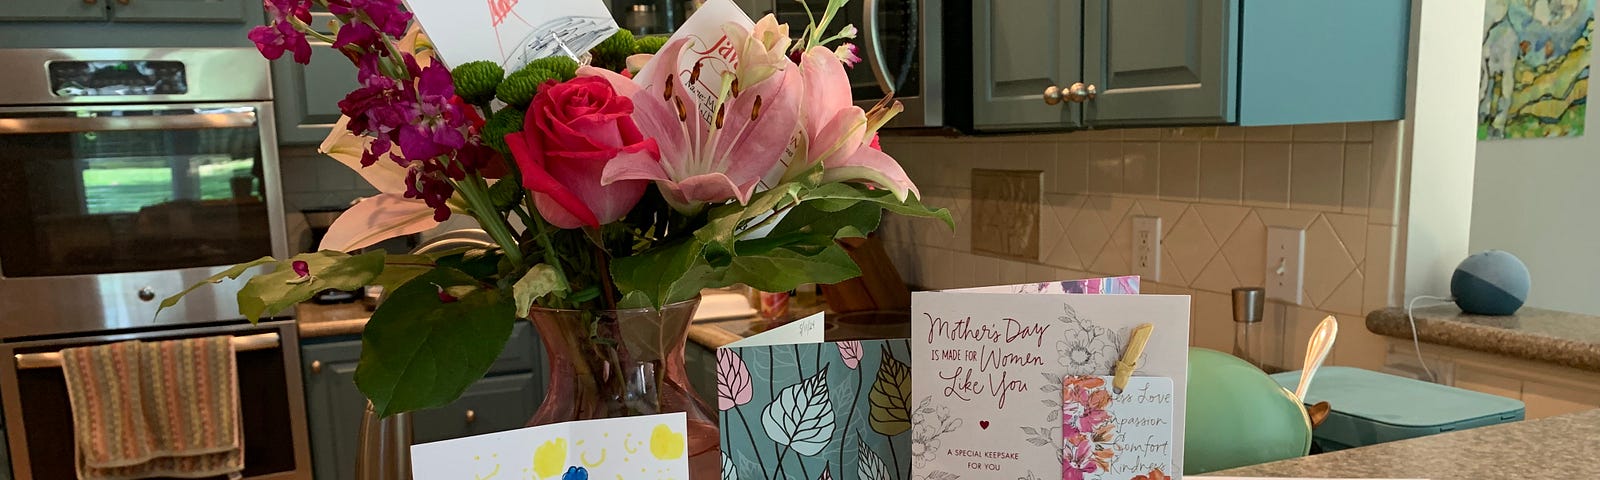 Mother’s Day art and flowers